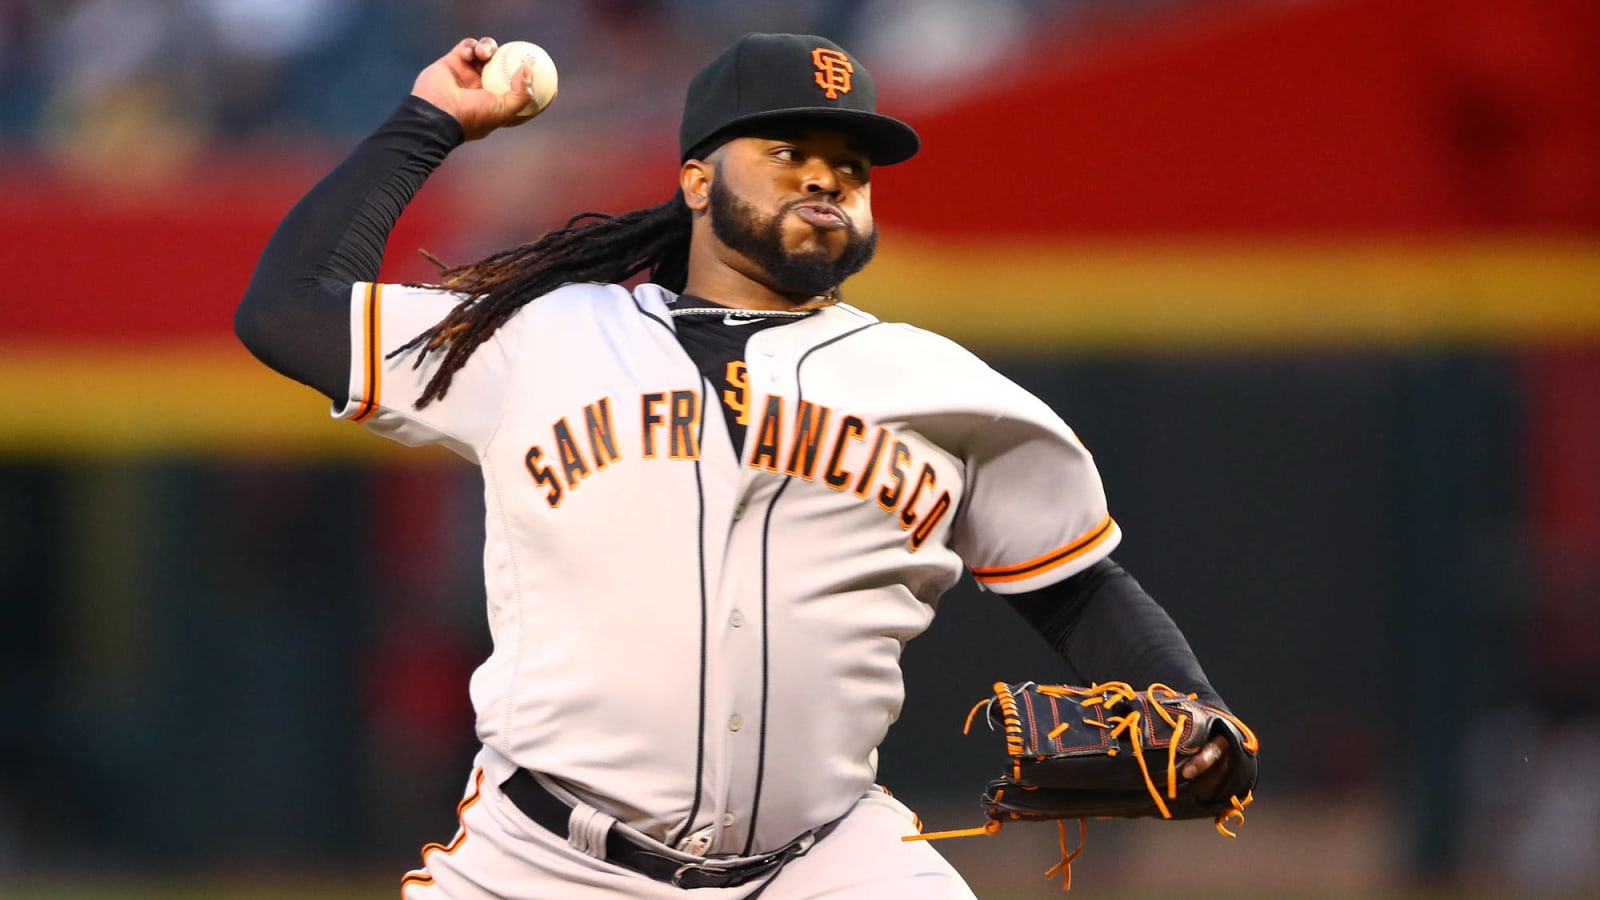 Johnny Cueto's beloved horse died from eating poisonous grasshoppers